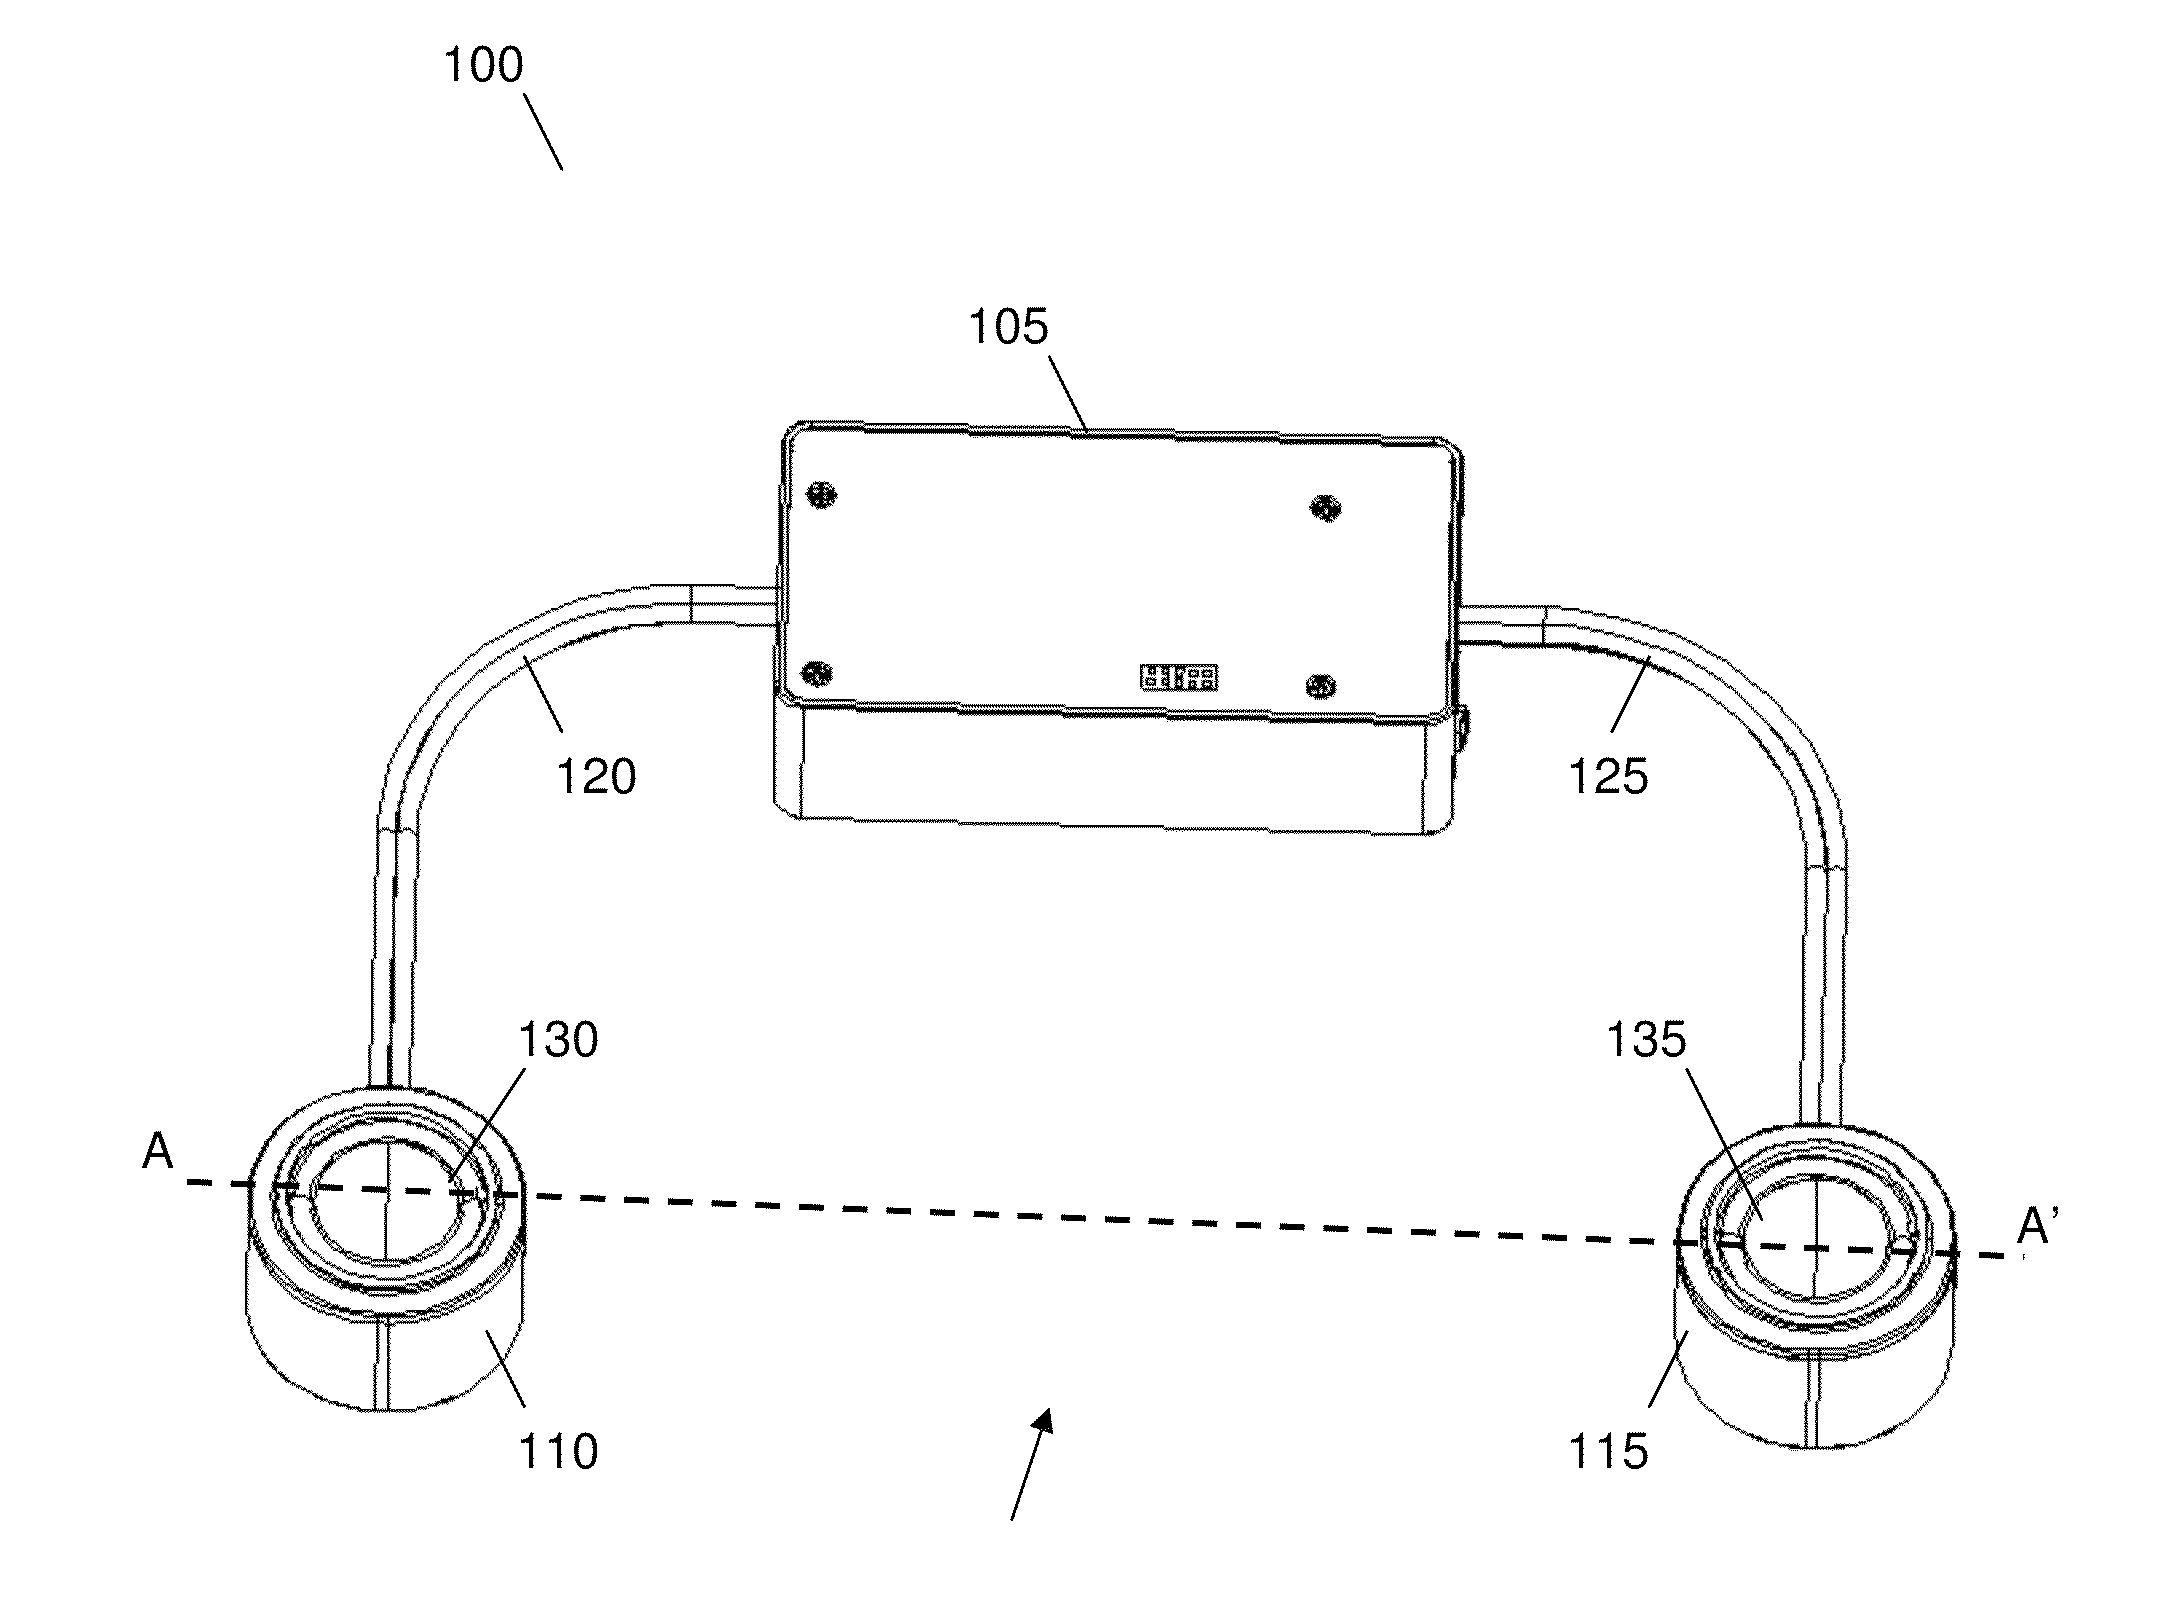 Wearable speaker system with satellite speakers and a passive radiator